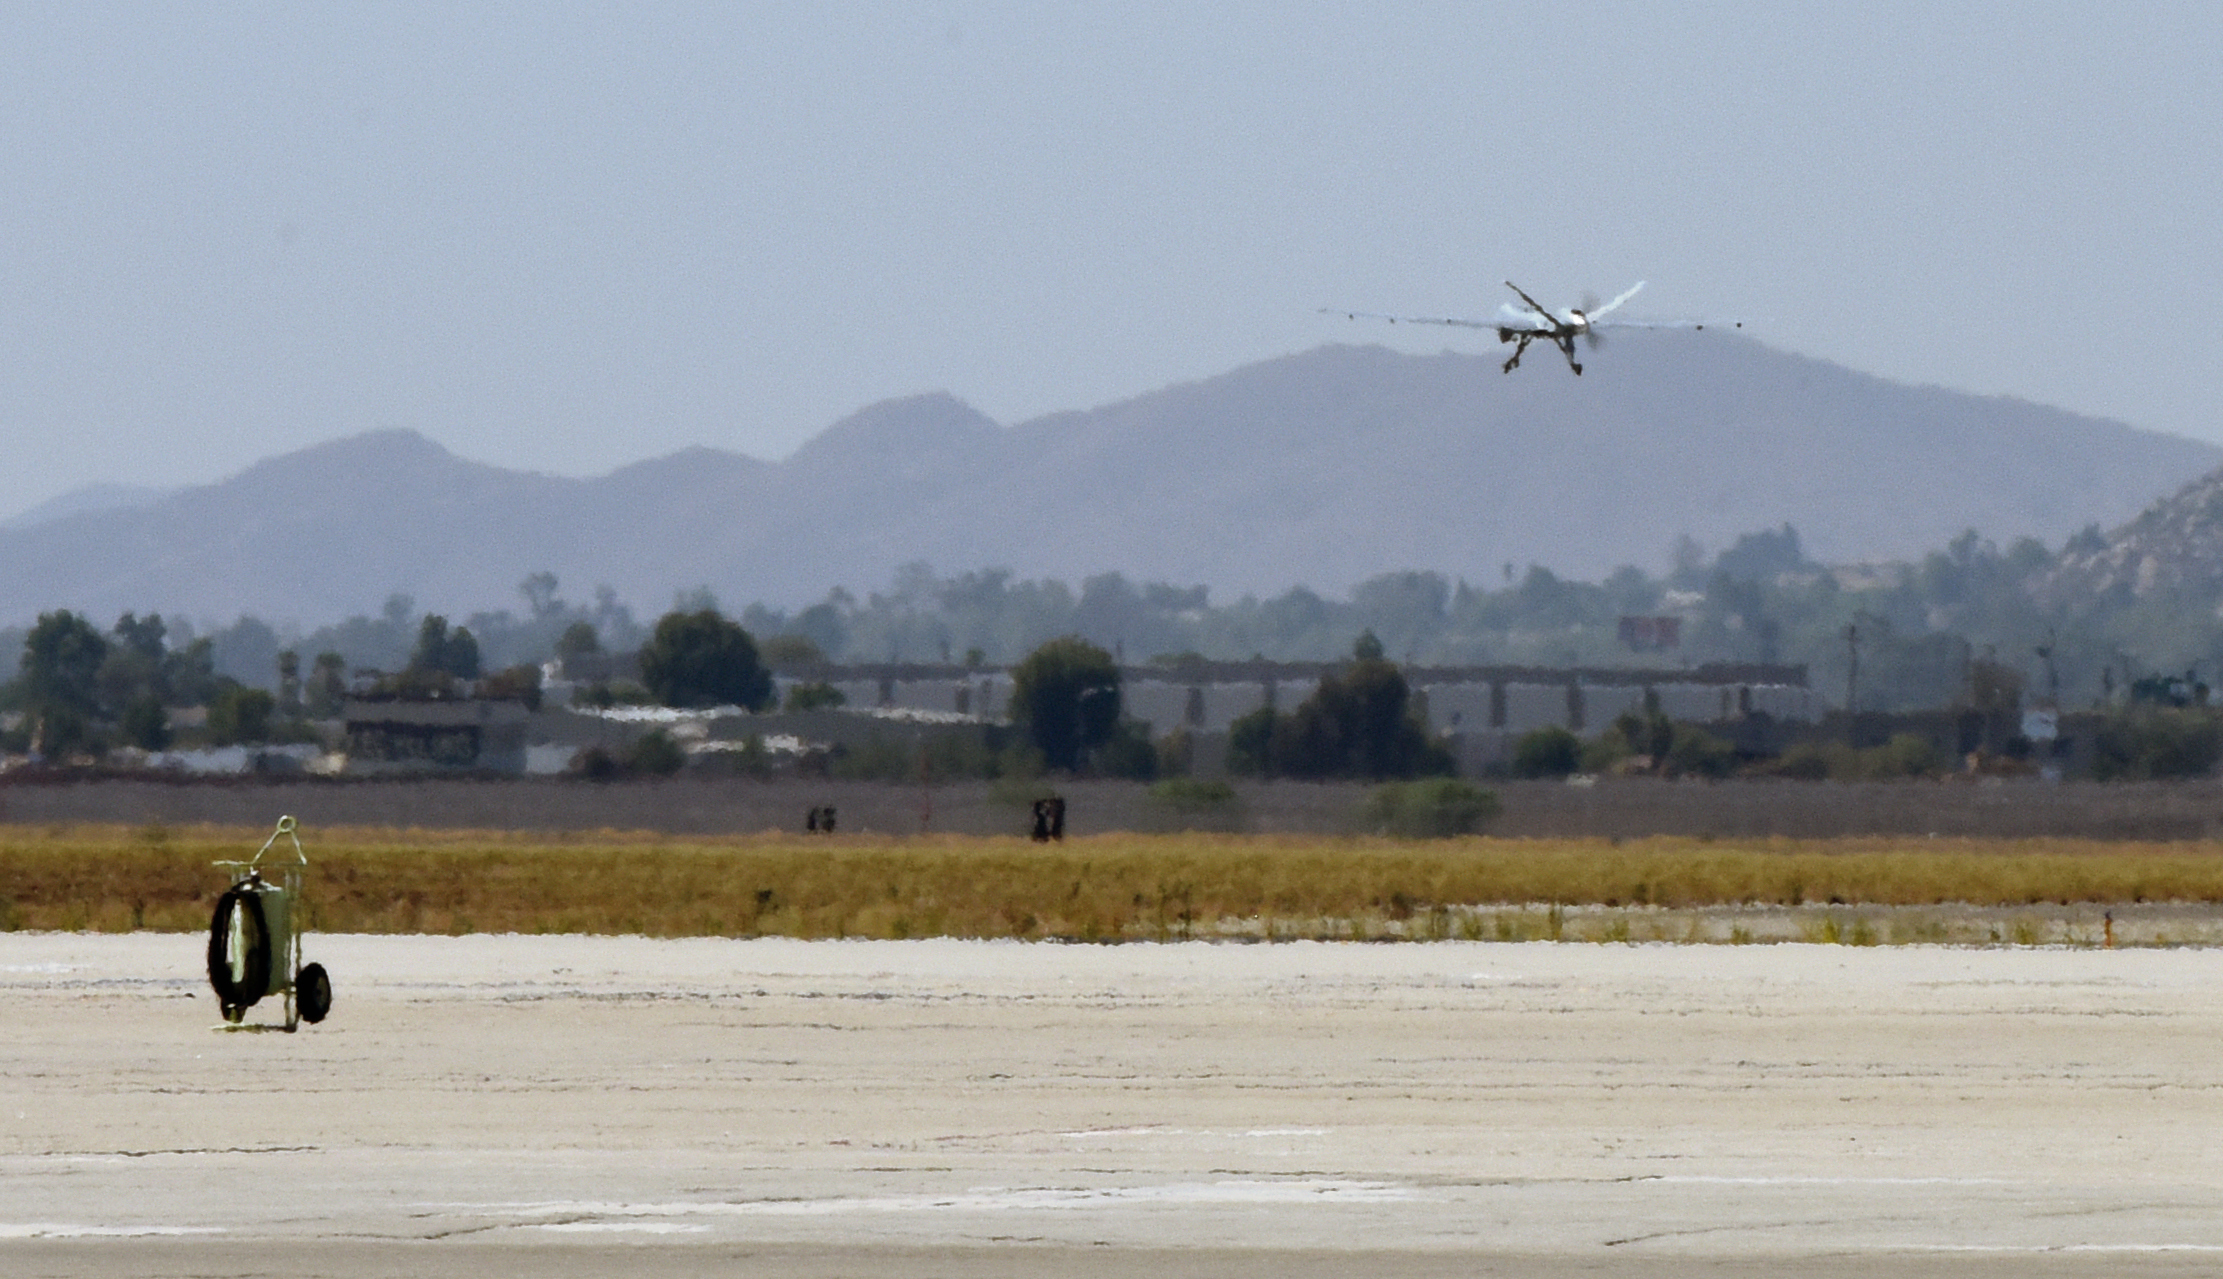 PHOTO: An MQ-9 Reaper remotely piloted aircraft takes off from March Air Reserve Base, California, Aug. 1, 2018, to provide visualization and mapping data to firefighters battling deadly fires in Northern California.